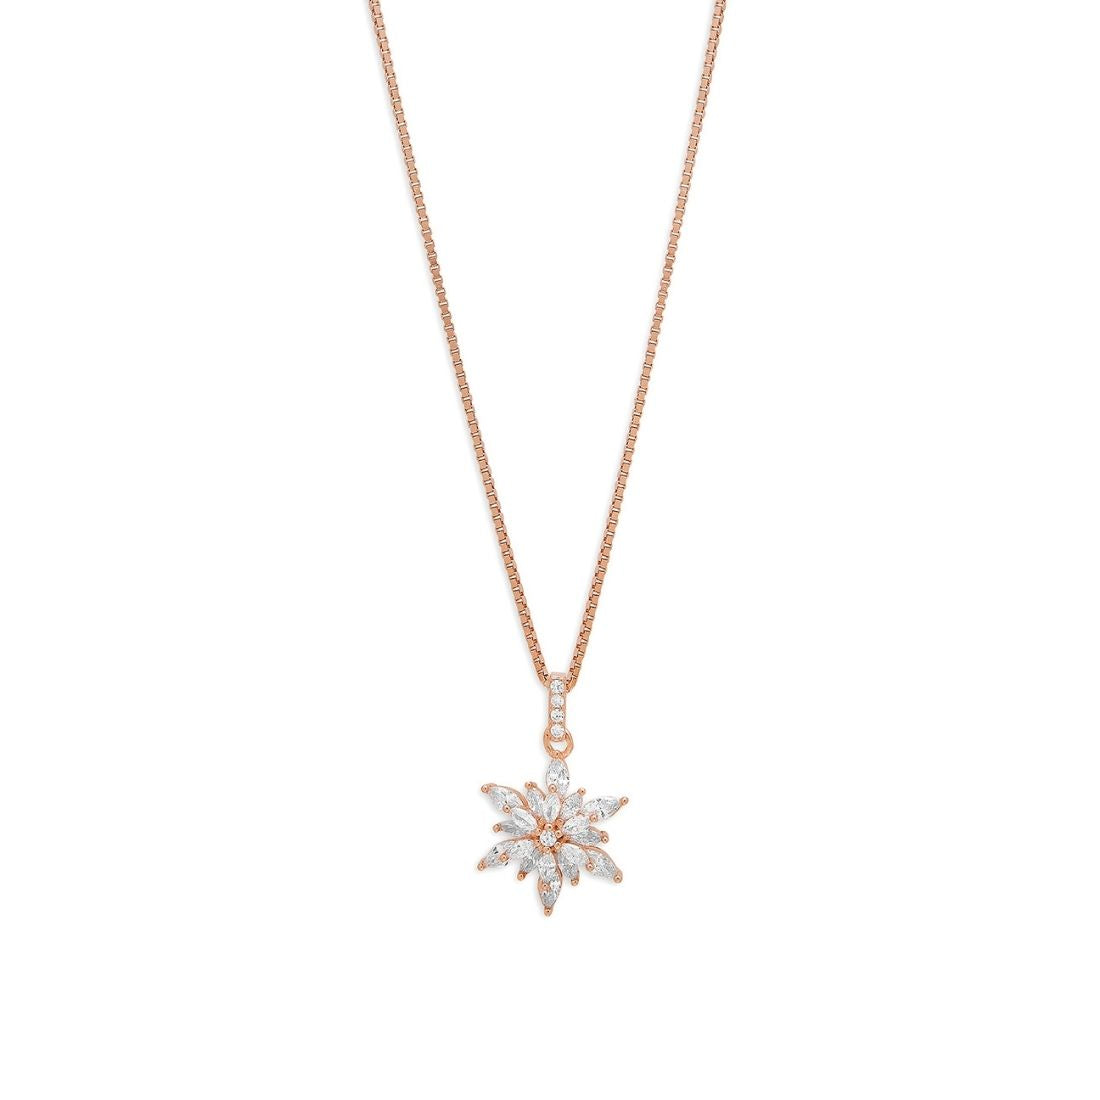 Floral Elegance 925 Sterling Silver Rose gold Pendant with Chain